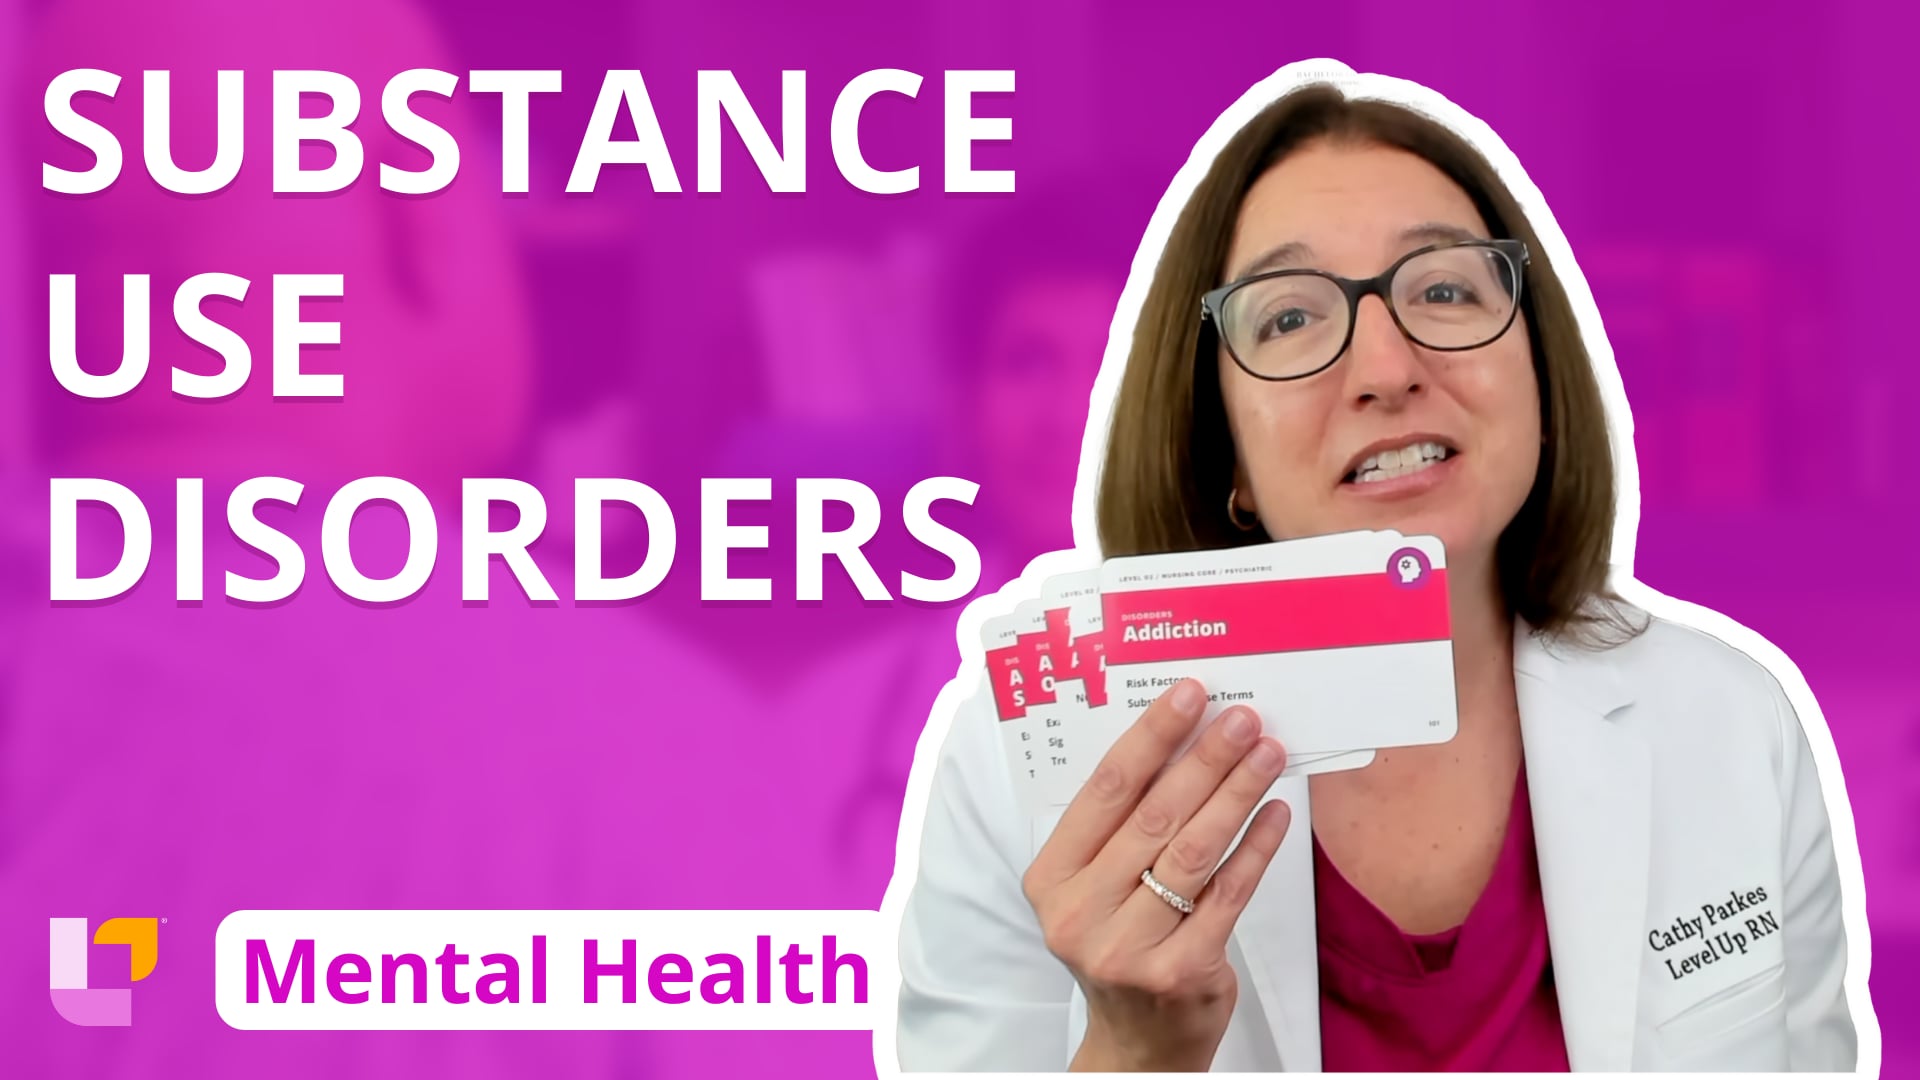 Psychiatric Mental Health - Disorders, part 39: Substance Use Disorders